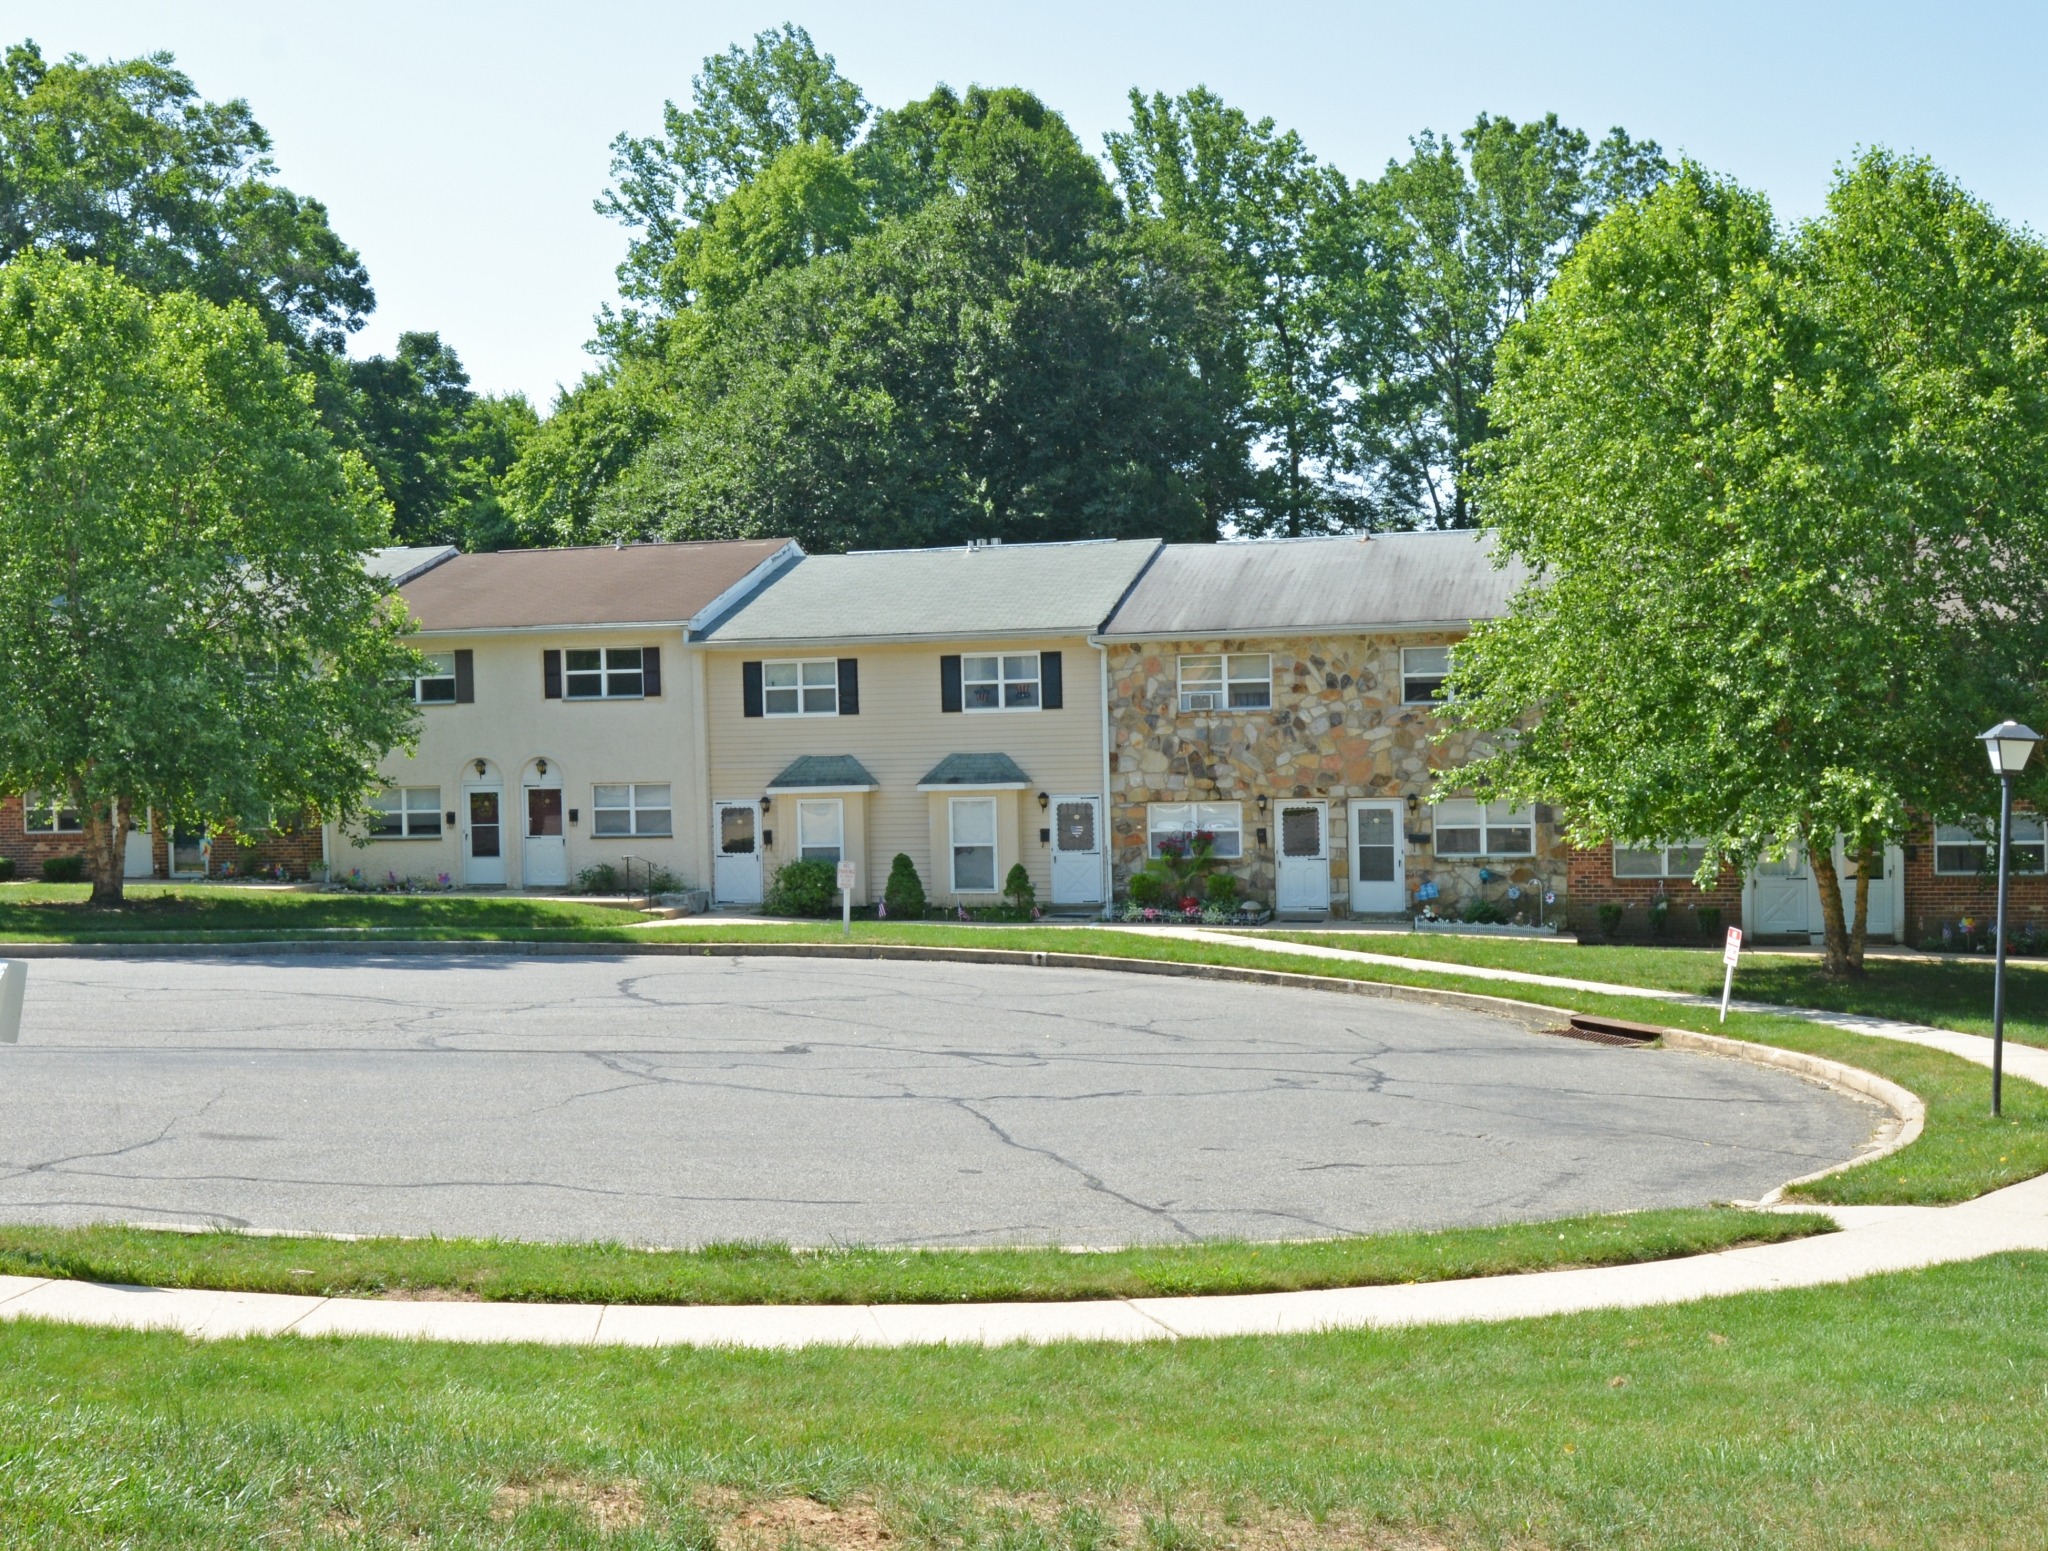 Rolling Glen cul-de-sac with townhomes